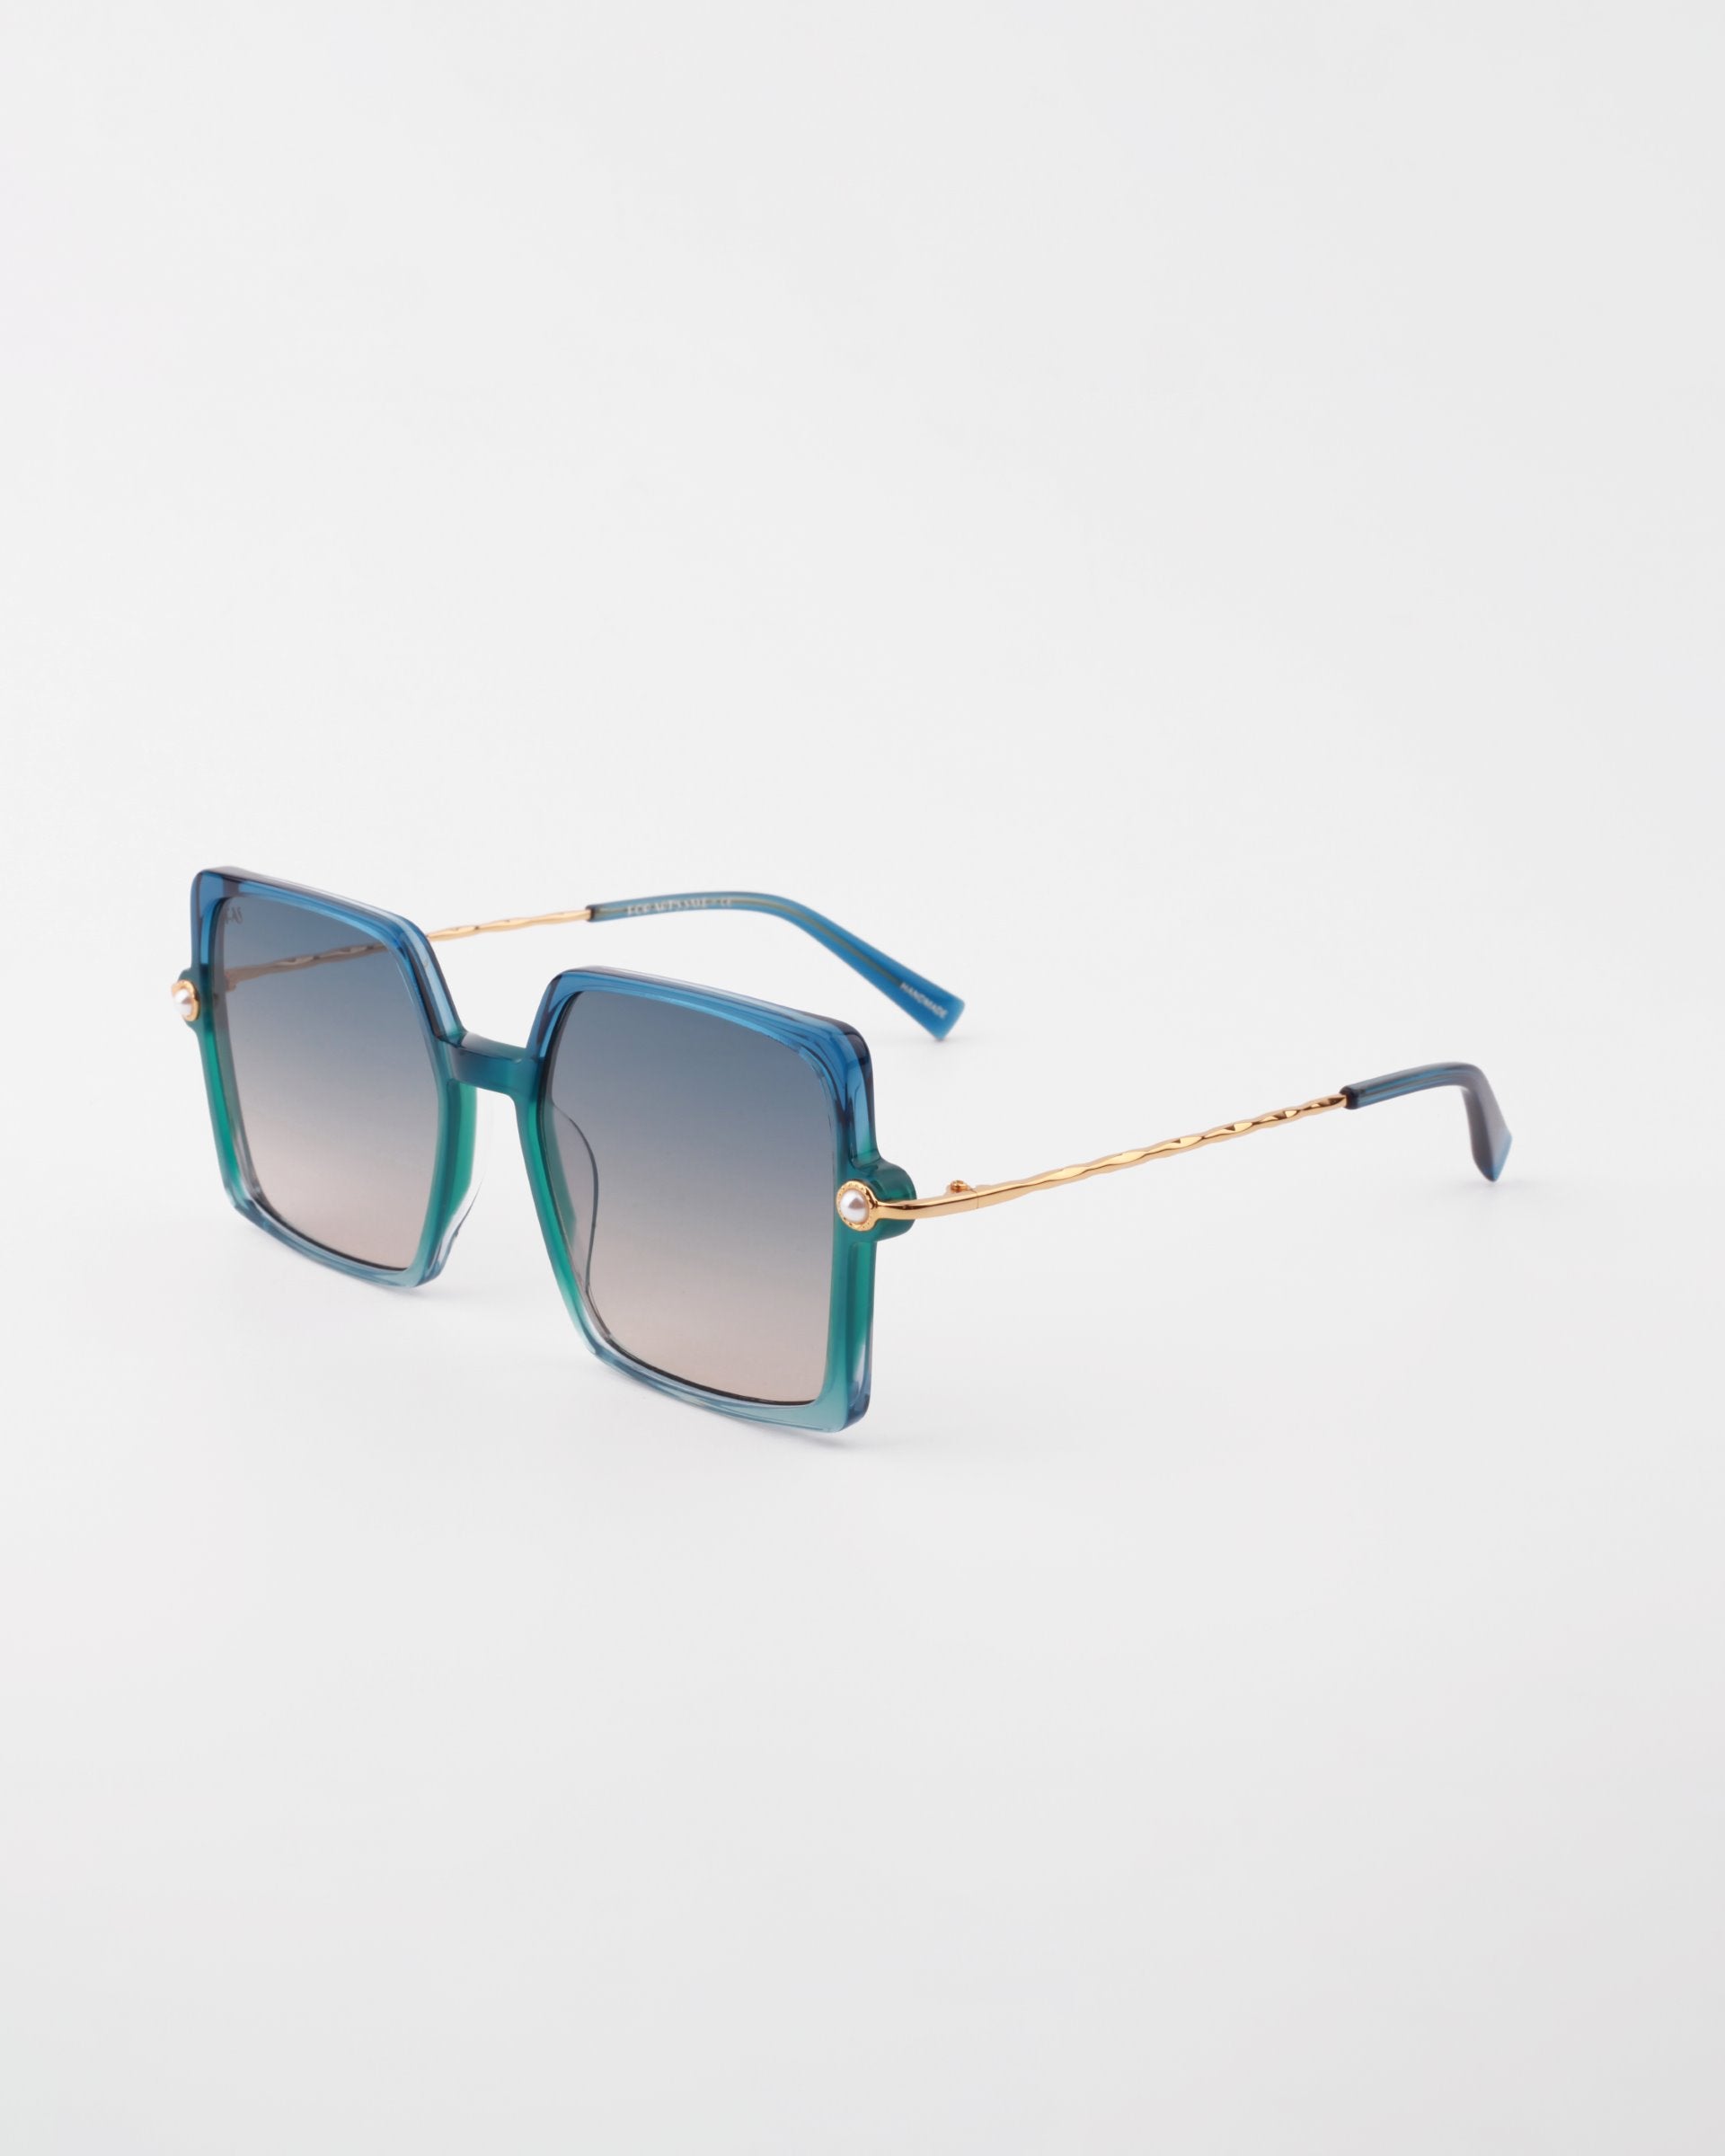 Square-shaped handmade acetate Moxie sunglasses by For Art&#39;s Sake® with gradient green and blue frames and 18-karat gold-plated temples on a white background. The lenses are tinted, transitioning from light to dark towards the top, offering UVA &amp; UVB protection. The temple tips are dark blue.